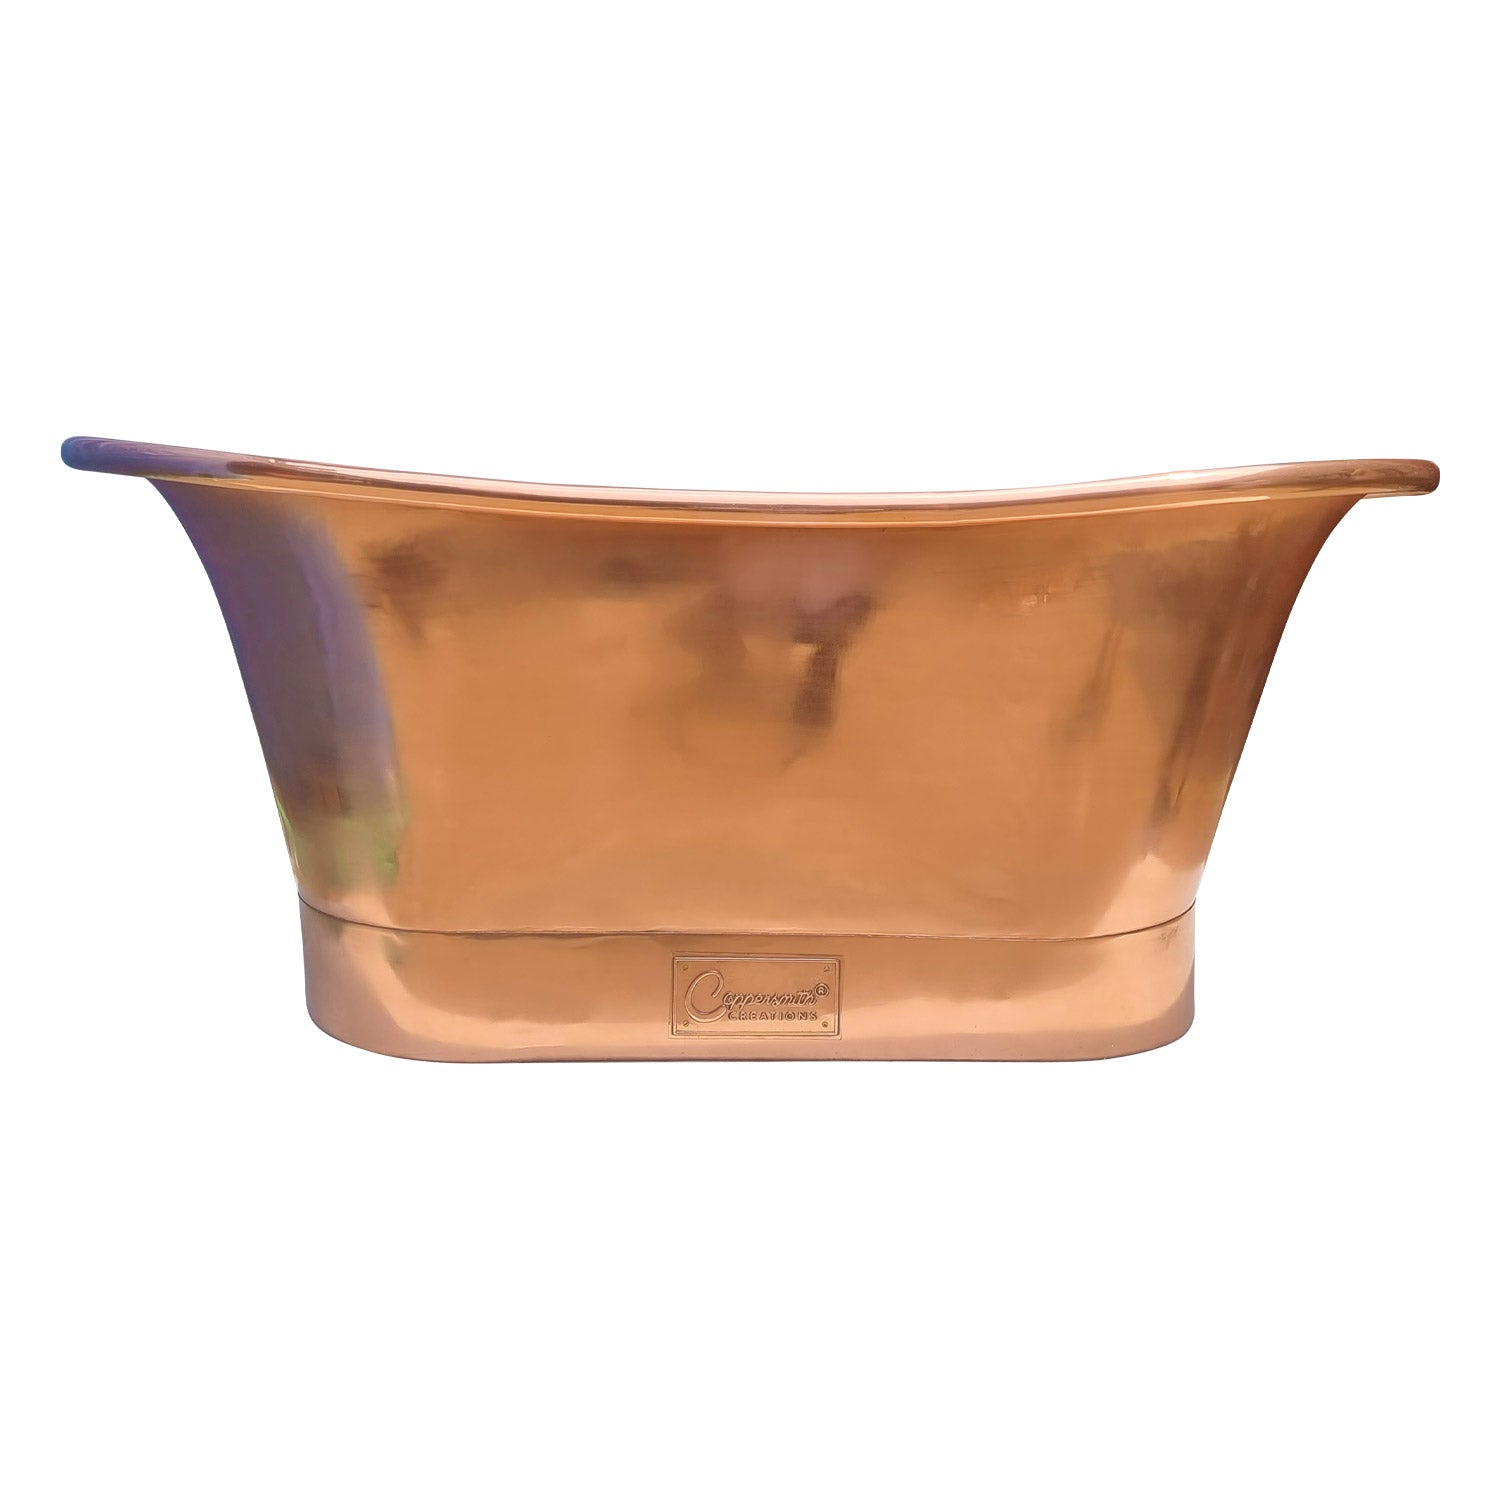 Coppersmith Creations Copper Freestanding Bath